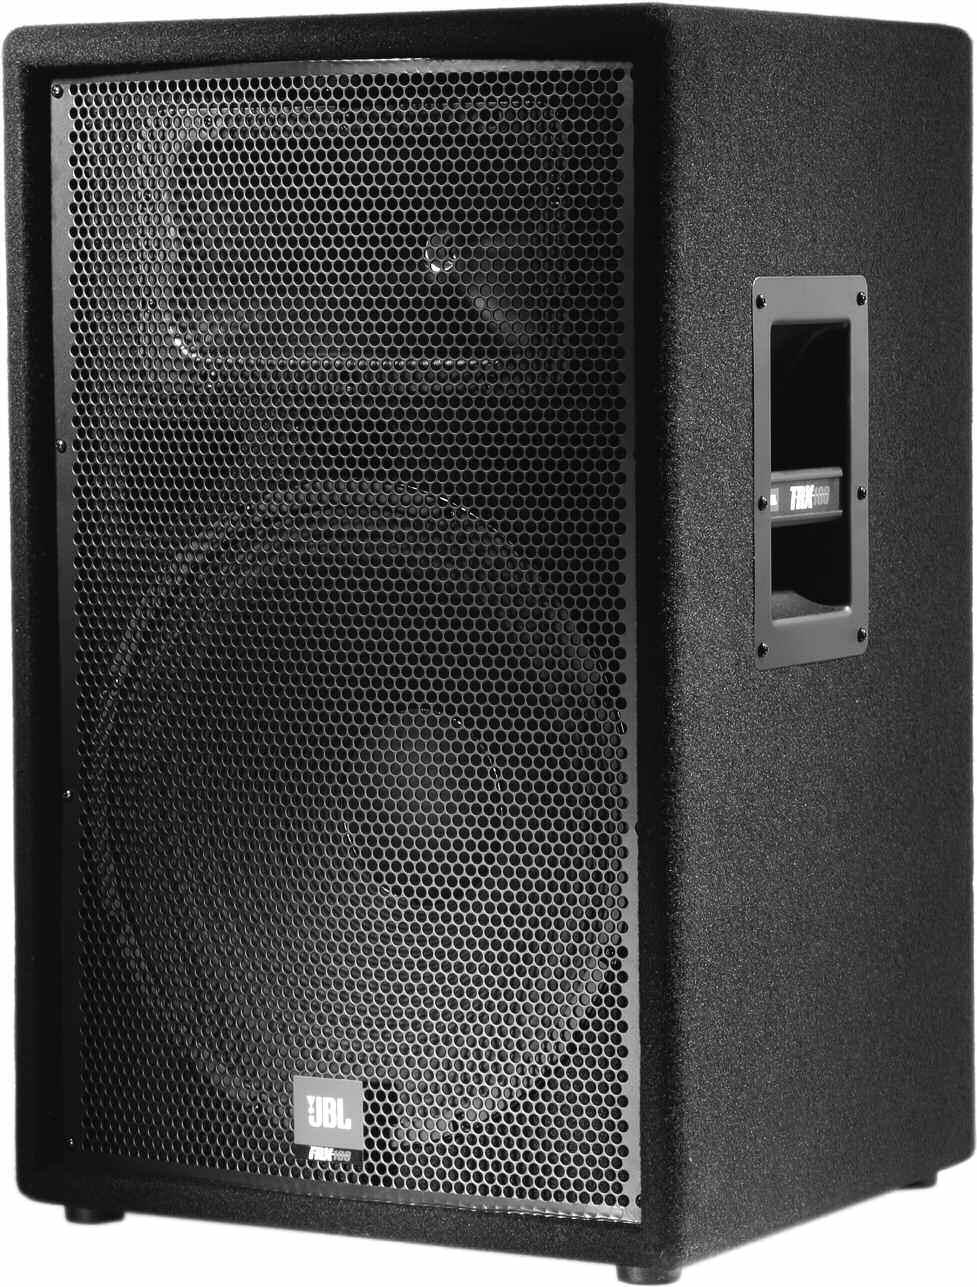 trapezoidal, 15" speaker system for use in live sound, dance music, and speech reinforcement. As with all JRX100 speakers, it s equipped with components built in our Northridge, California factory.